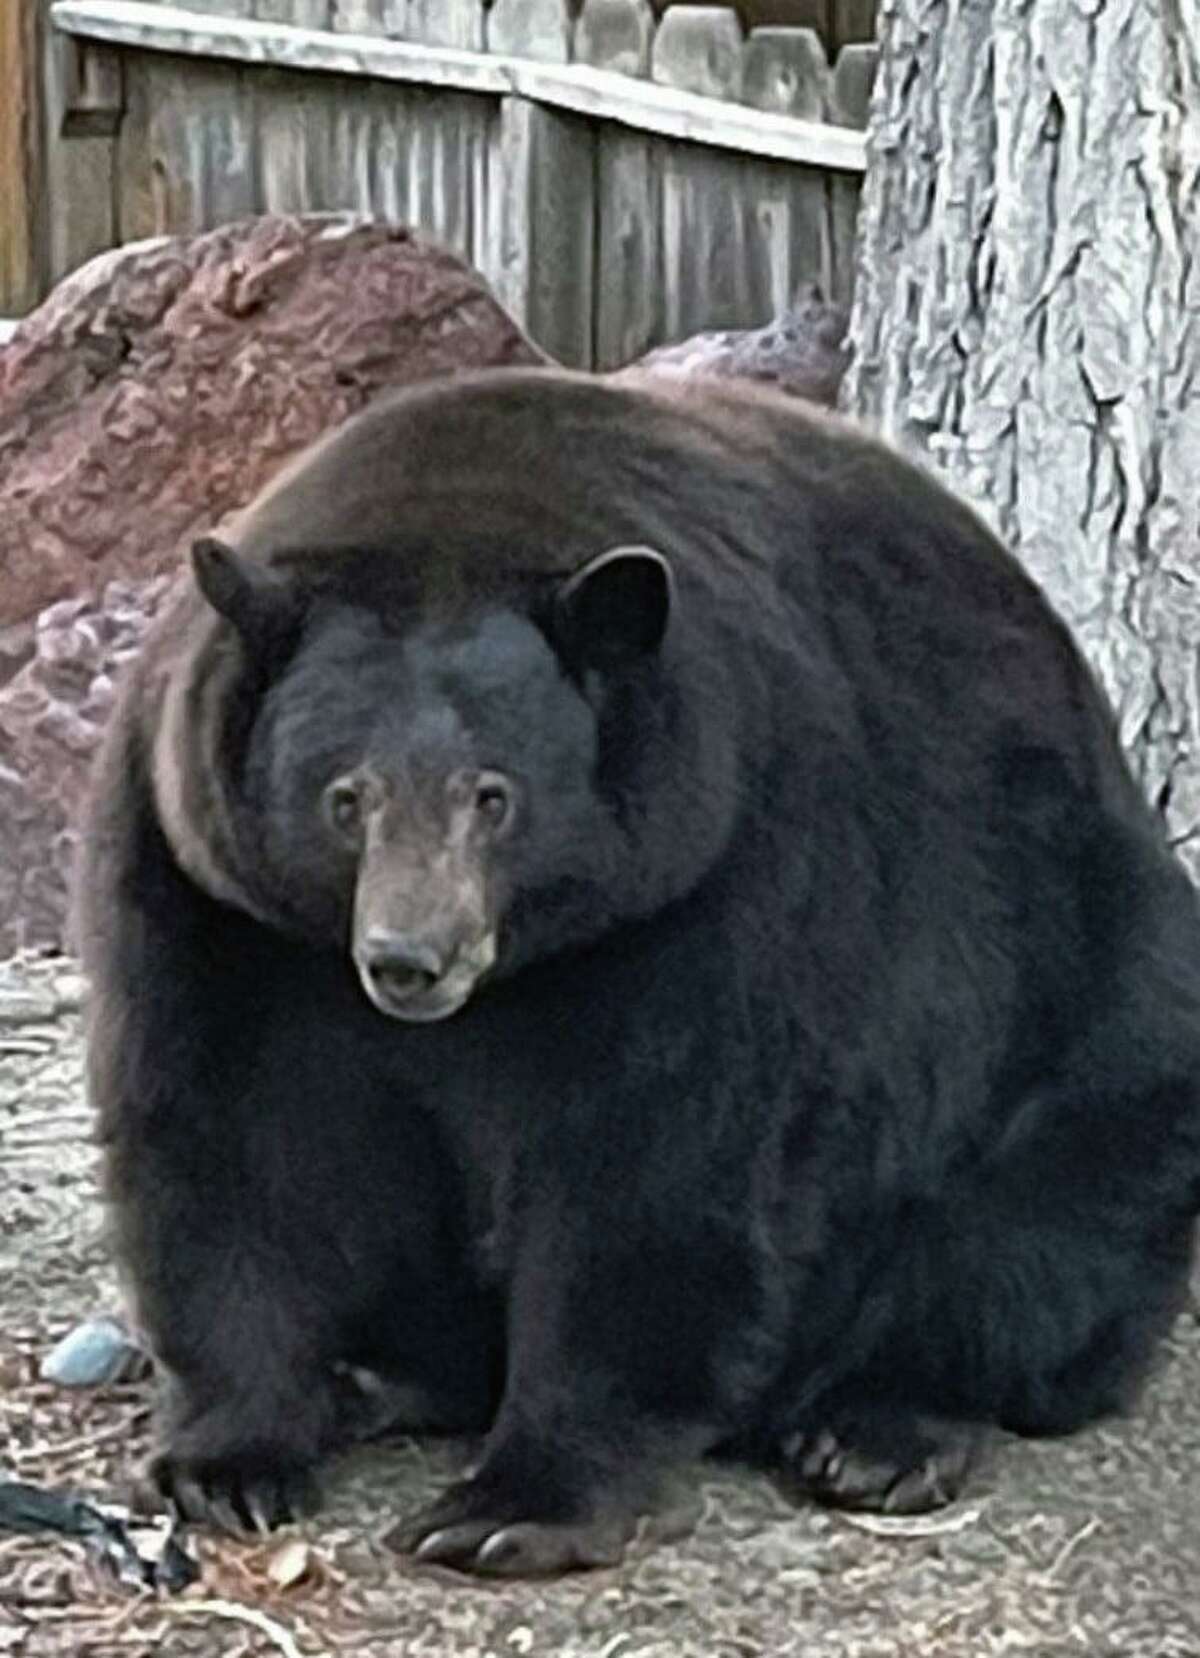 A 500-pound bear known as Hank the Tank has been breaking into homes around Lake Tahoe and helping himself to the food he finds.